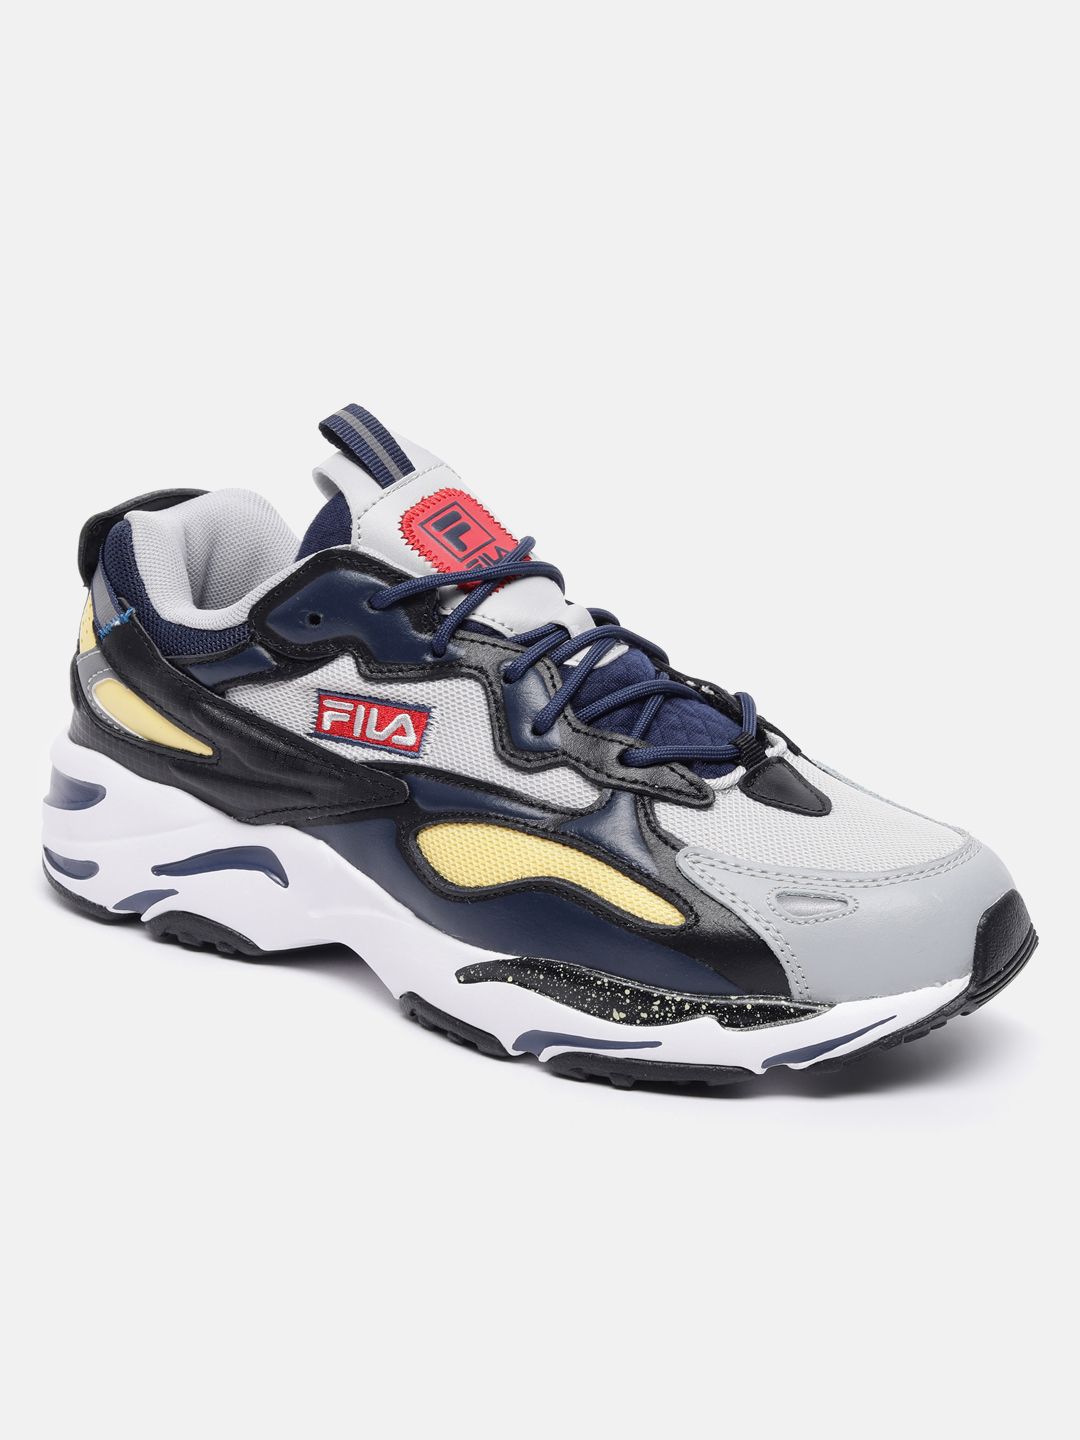 Fila Ray Tracer Lite Women's Shoes Safety Yellow-Green Gecko-Blue Atoll  5rm01331-743 (9 M